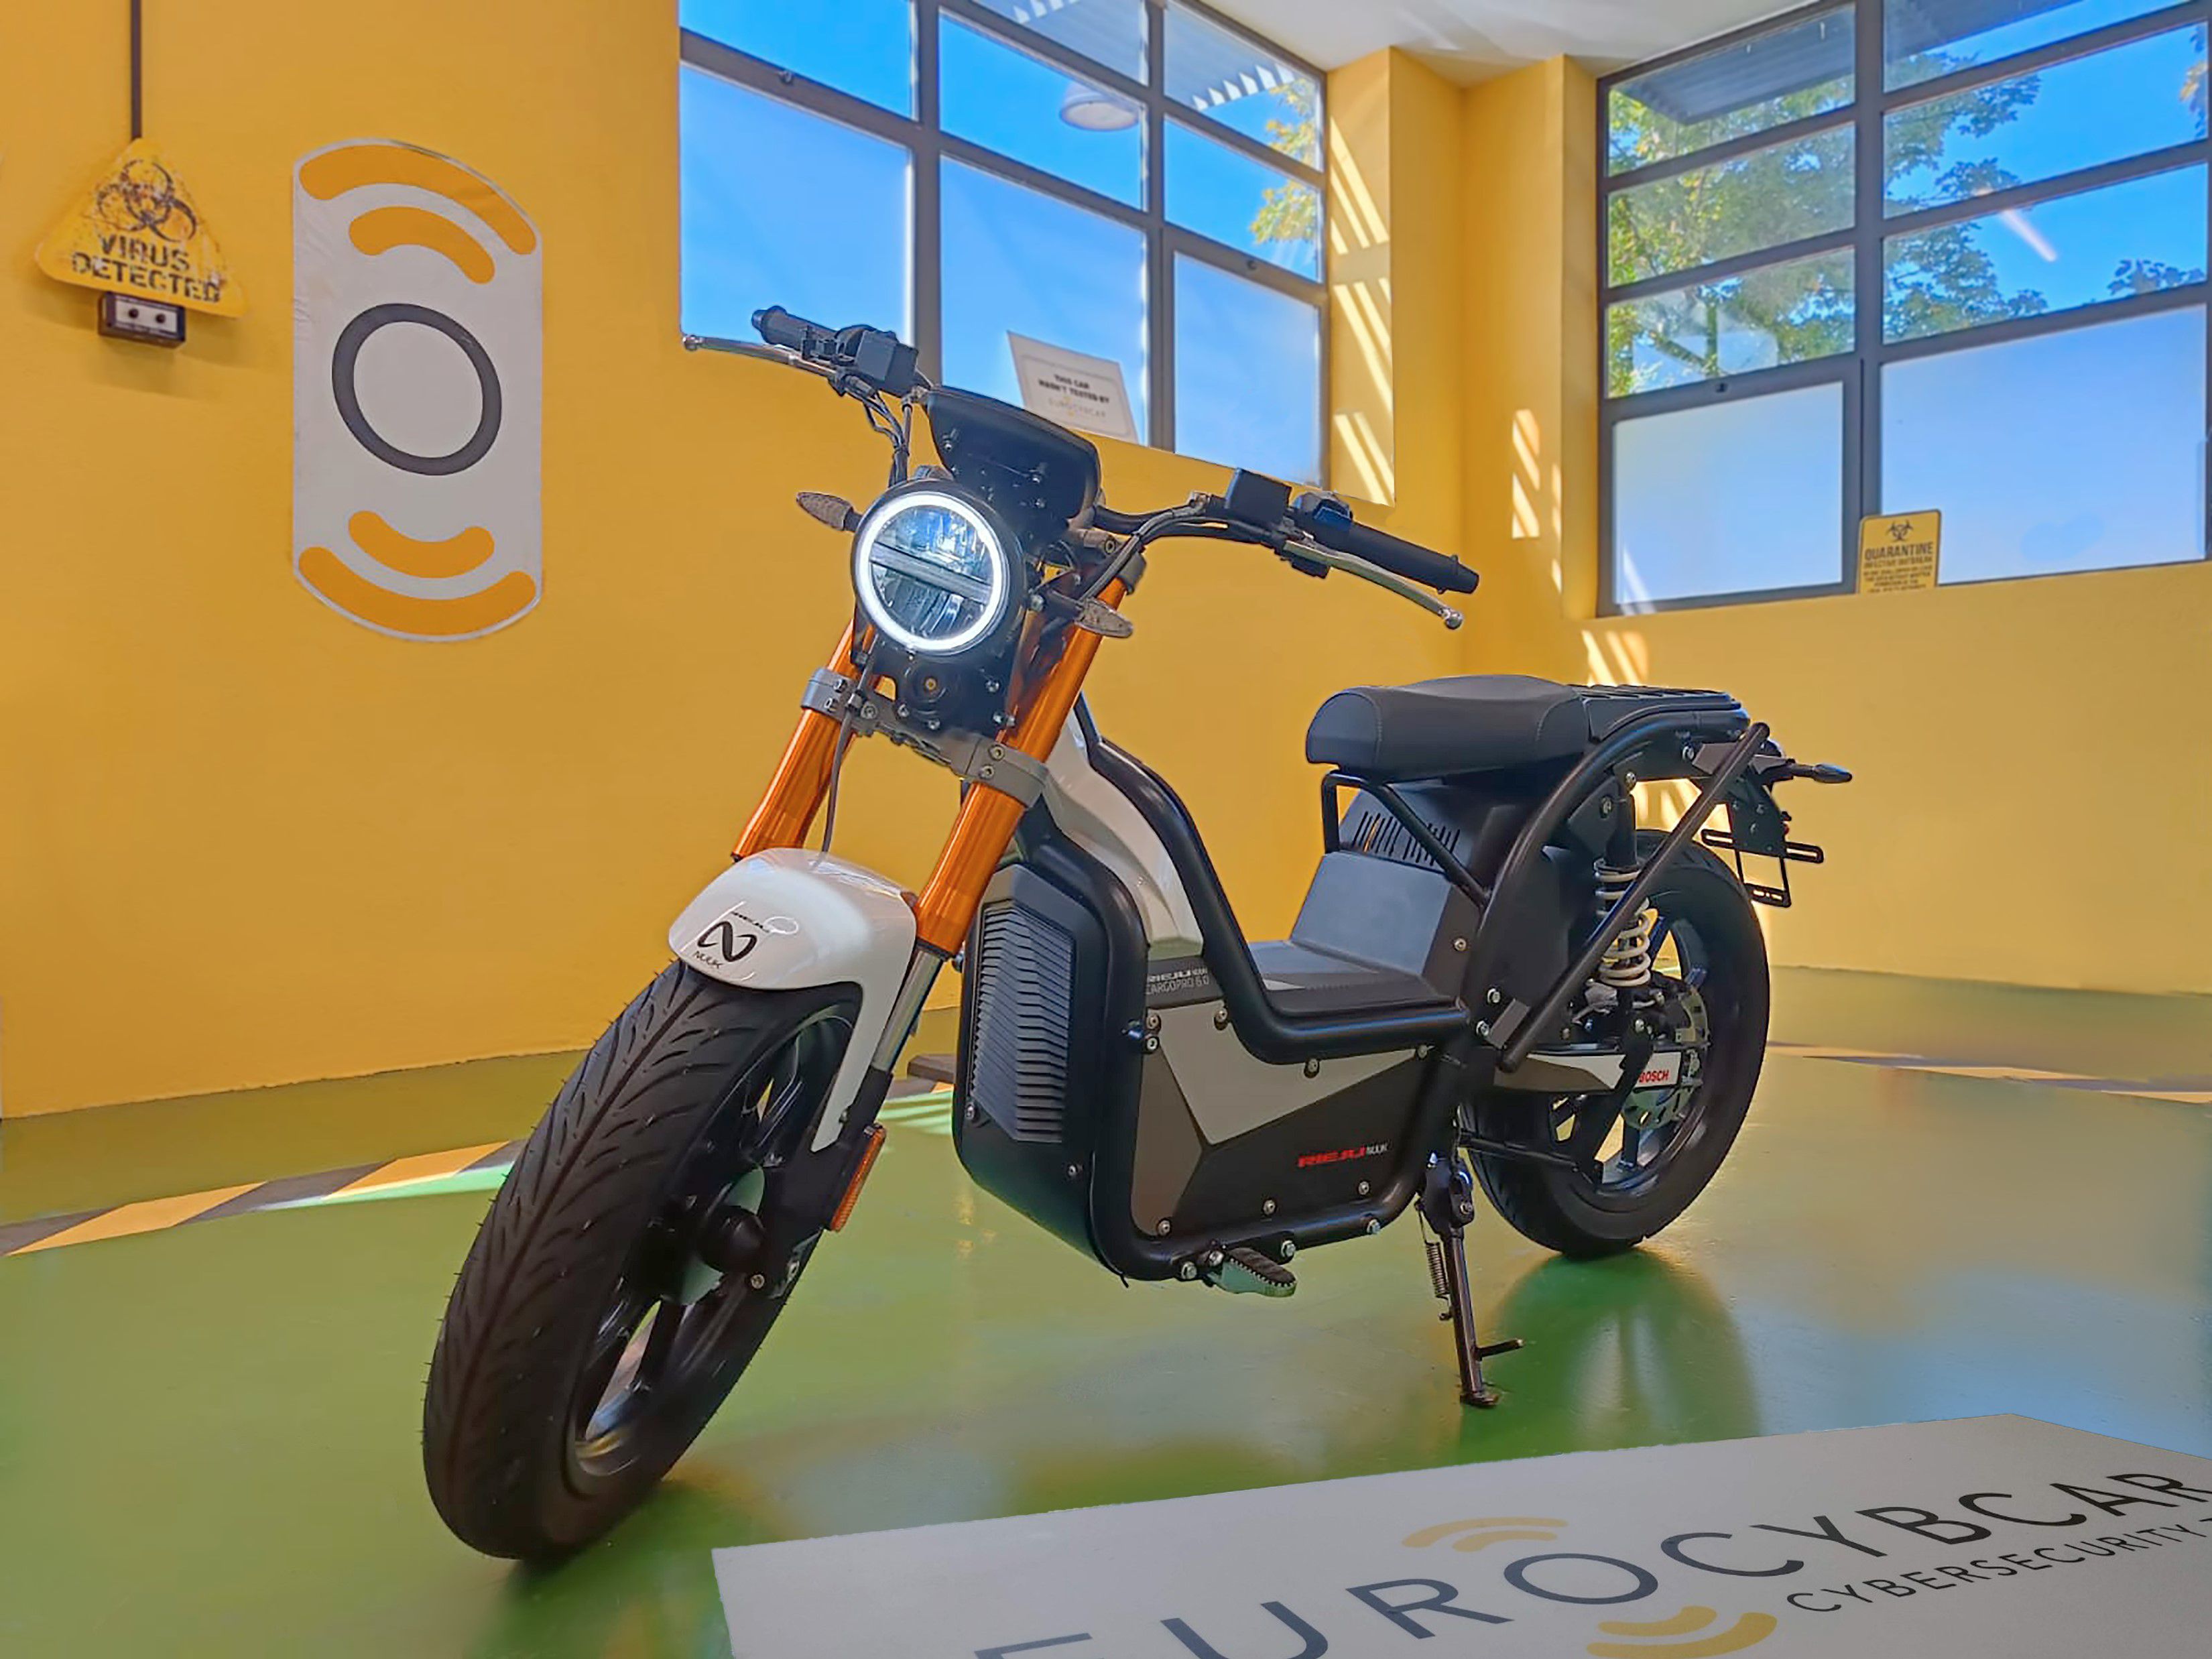 This electric motorcycle is certified as 